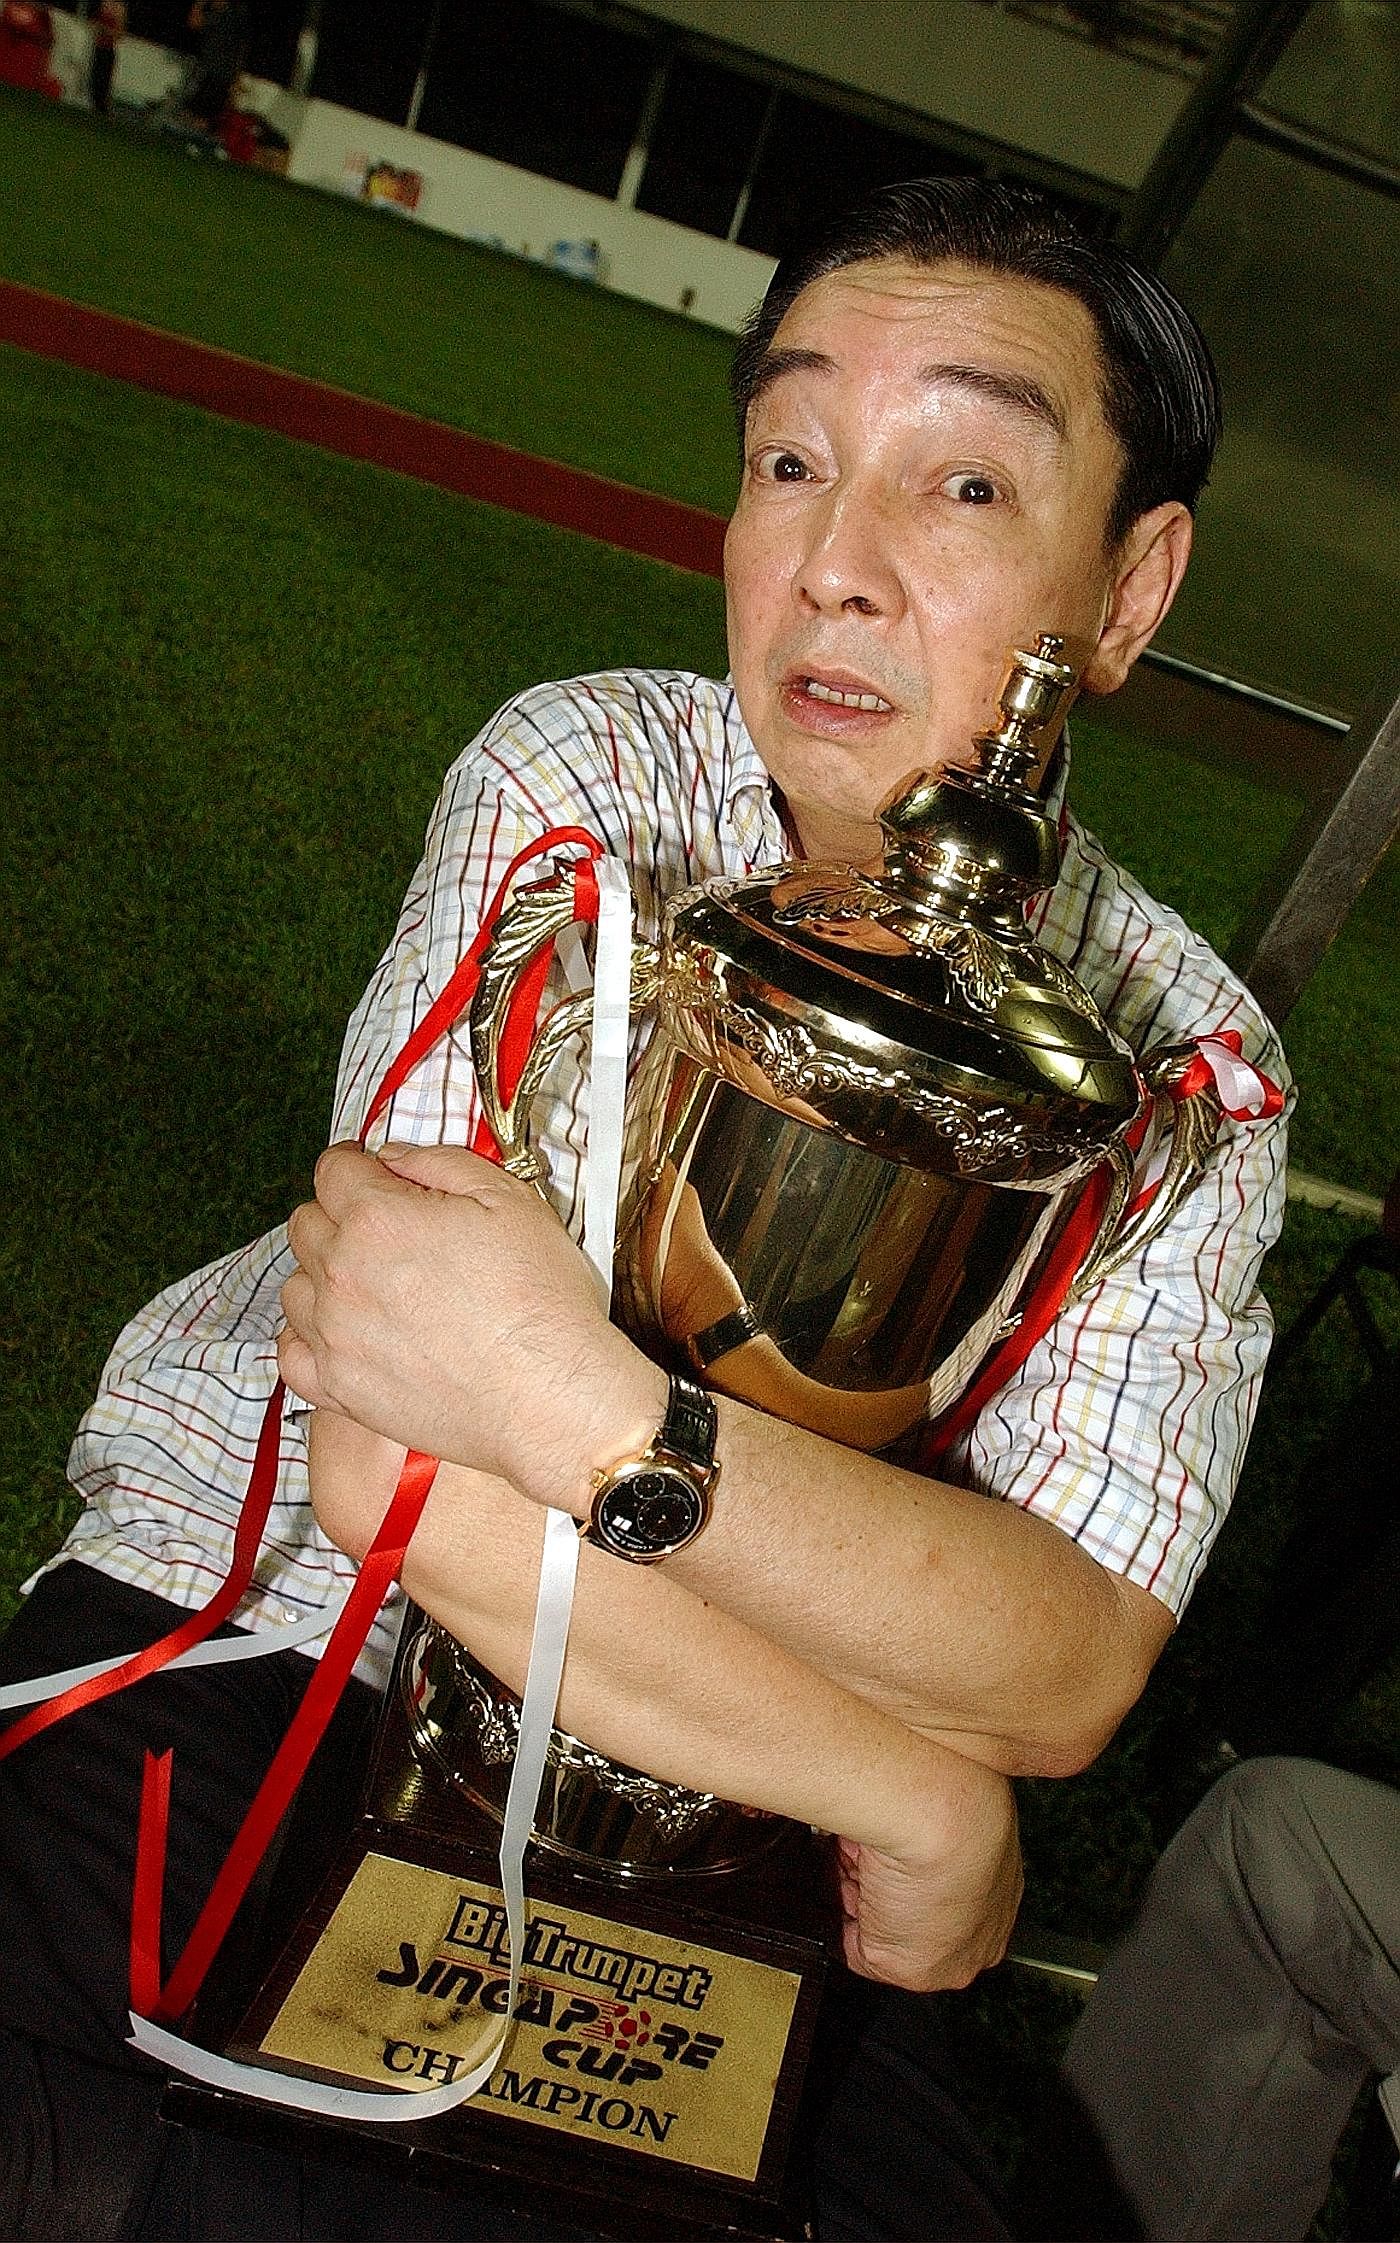 Teo Hock Seng back in 2004 with the Singapore Cup trophy. In 15 years as the Stags' chairman, he took pleasure in winning silverware and developing young players rather than aiming for lucrative returns.